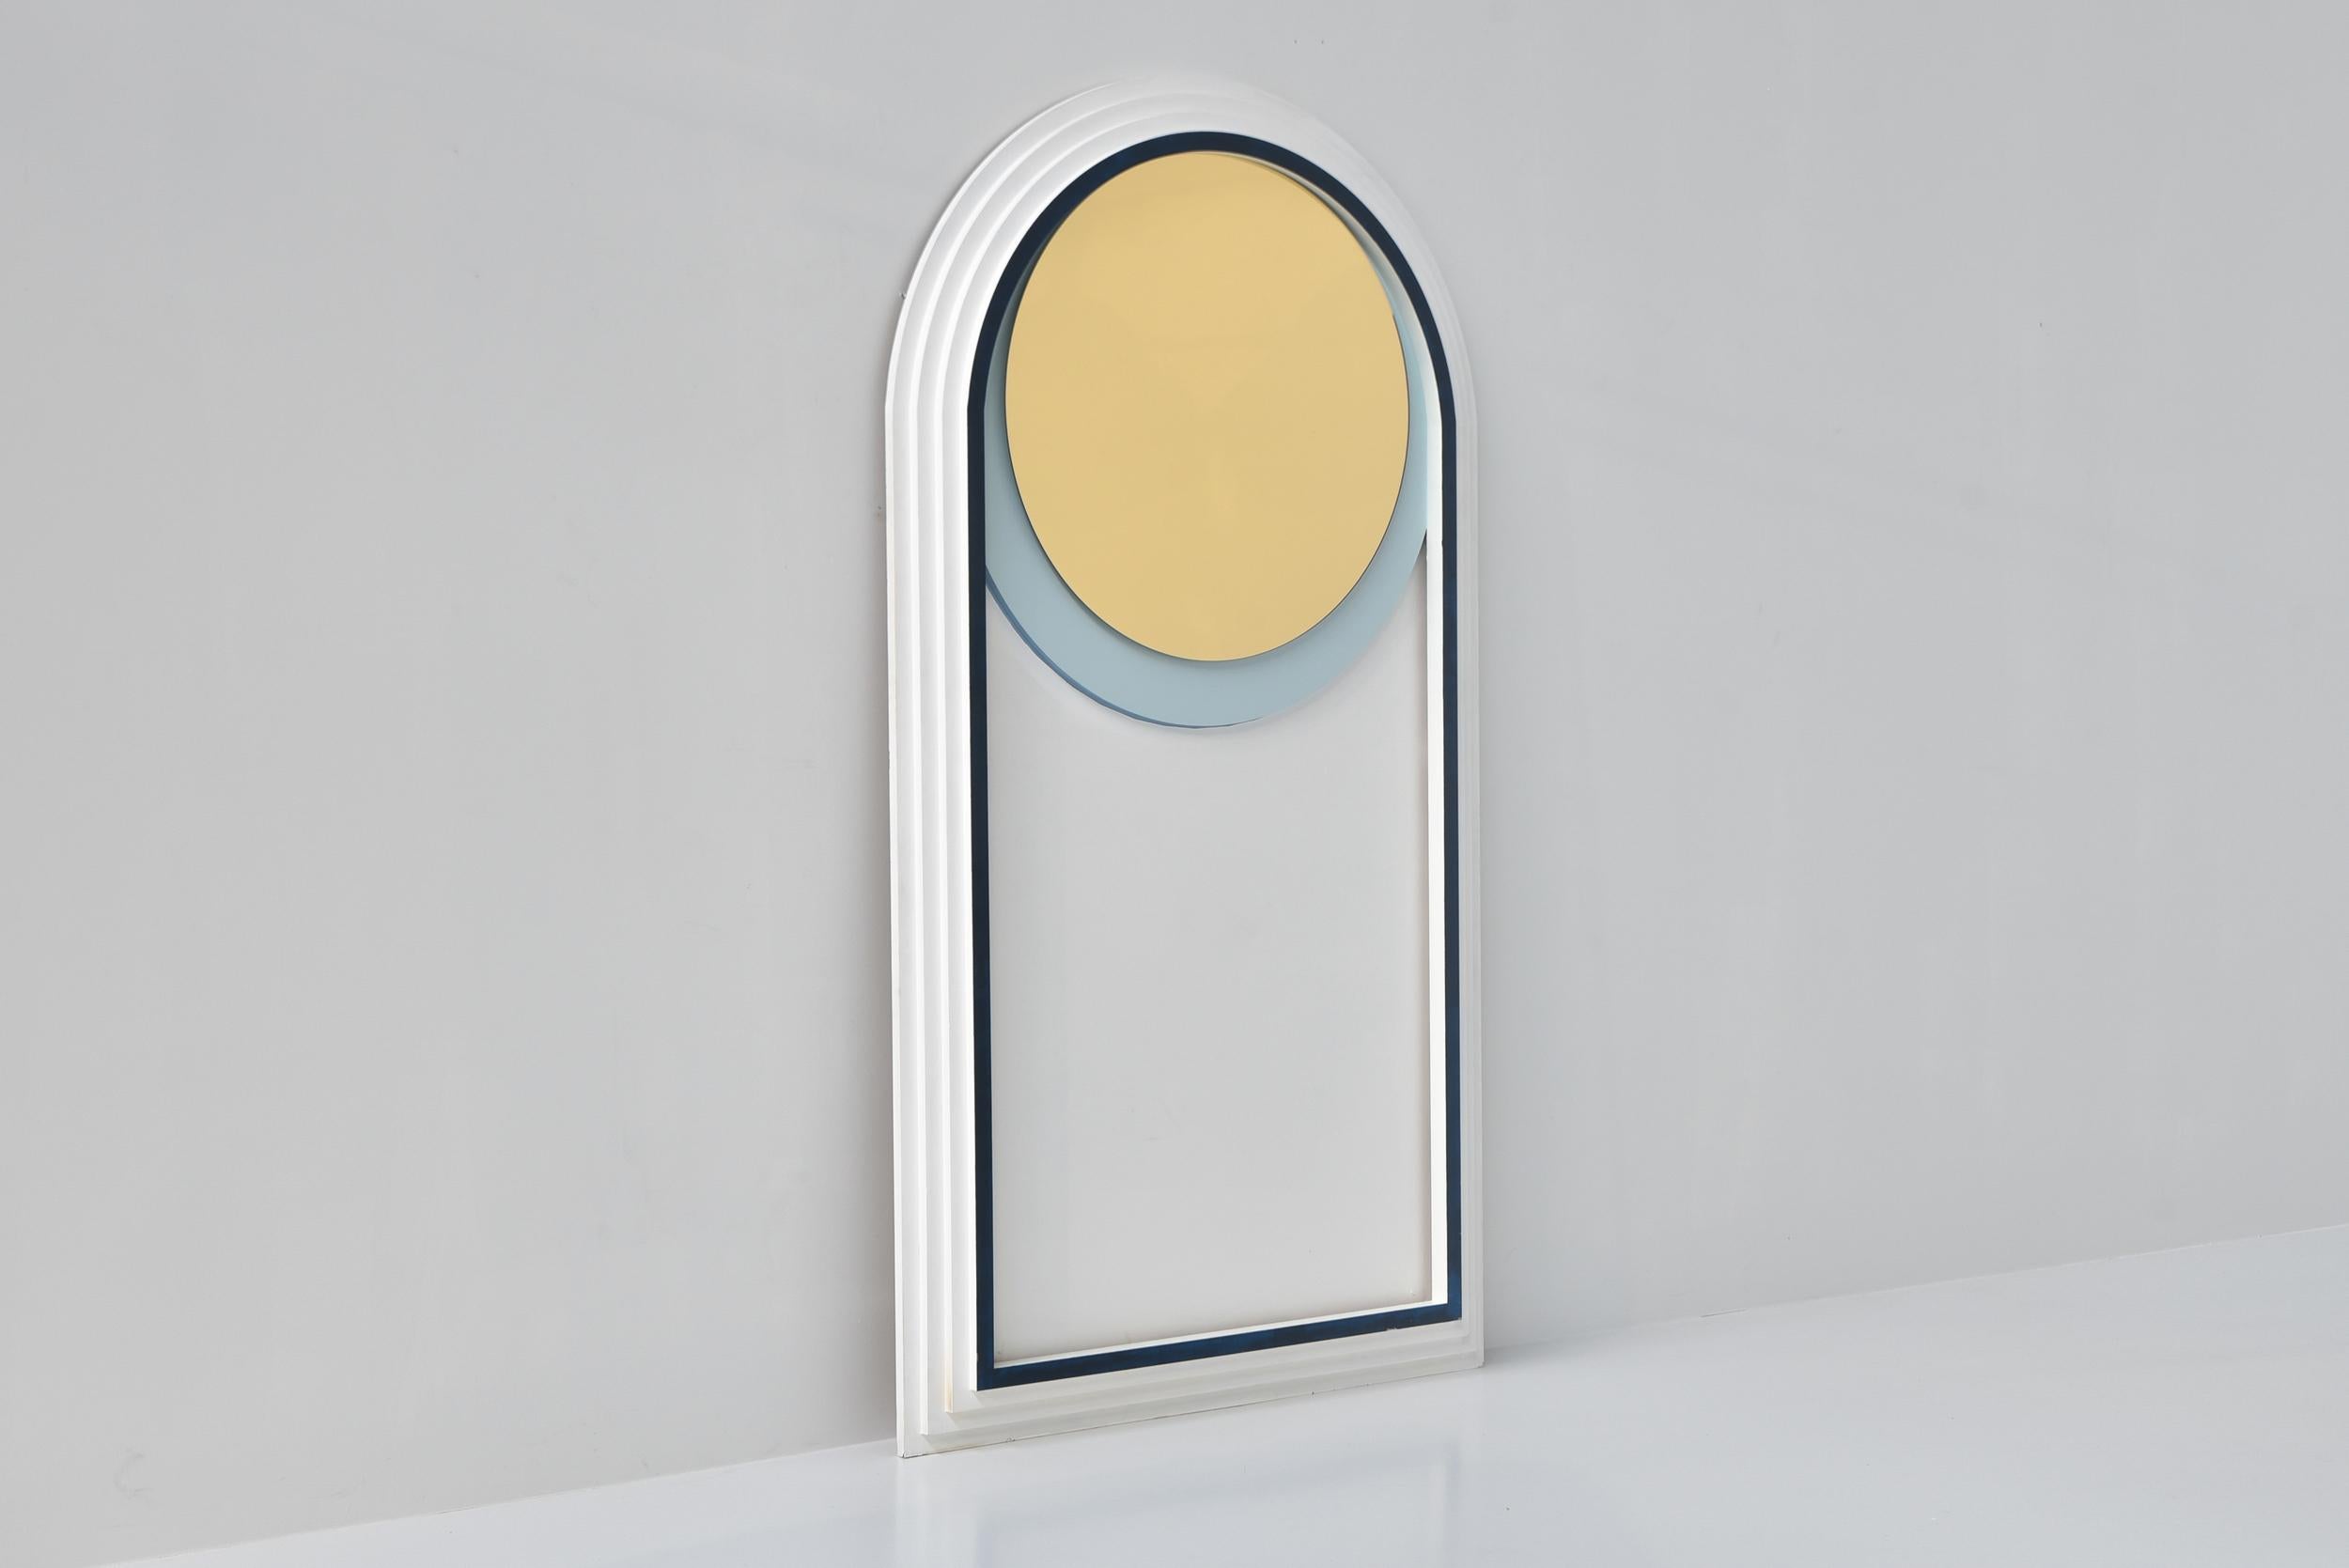 Organic Modern Contemporary Wall Mirror by Athos Burez for Poiret, Collectible Design, 2018 For Sale